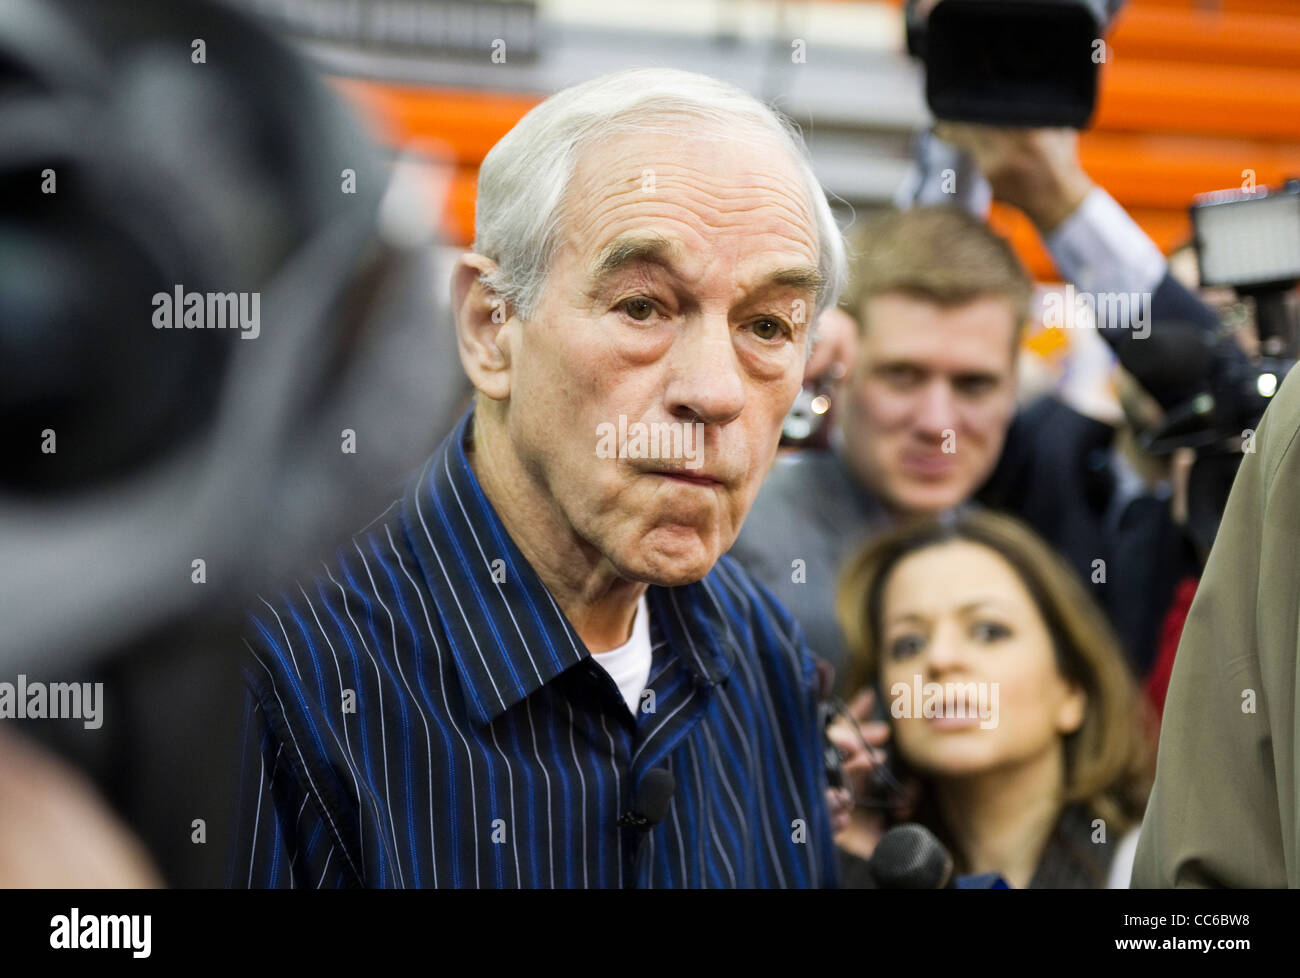 Republican presidential candidate Ron Paul waits to speak at a high school in West Des Moines, Iowa for the Iowa Caucuses Stock Photo